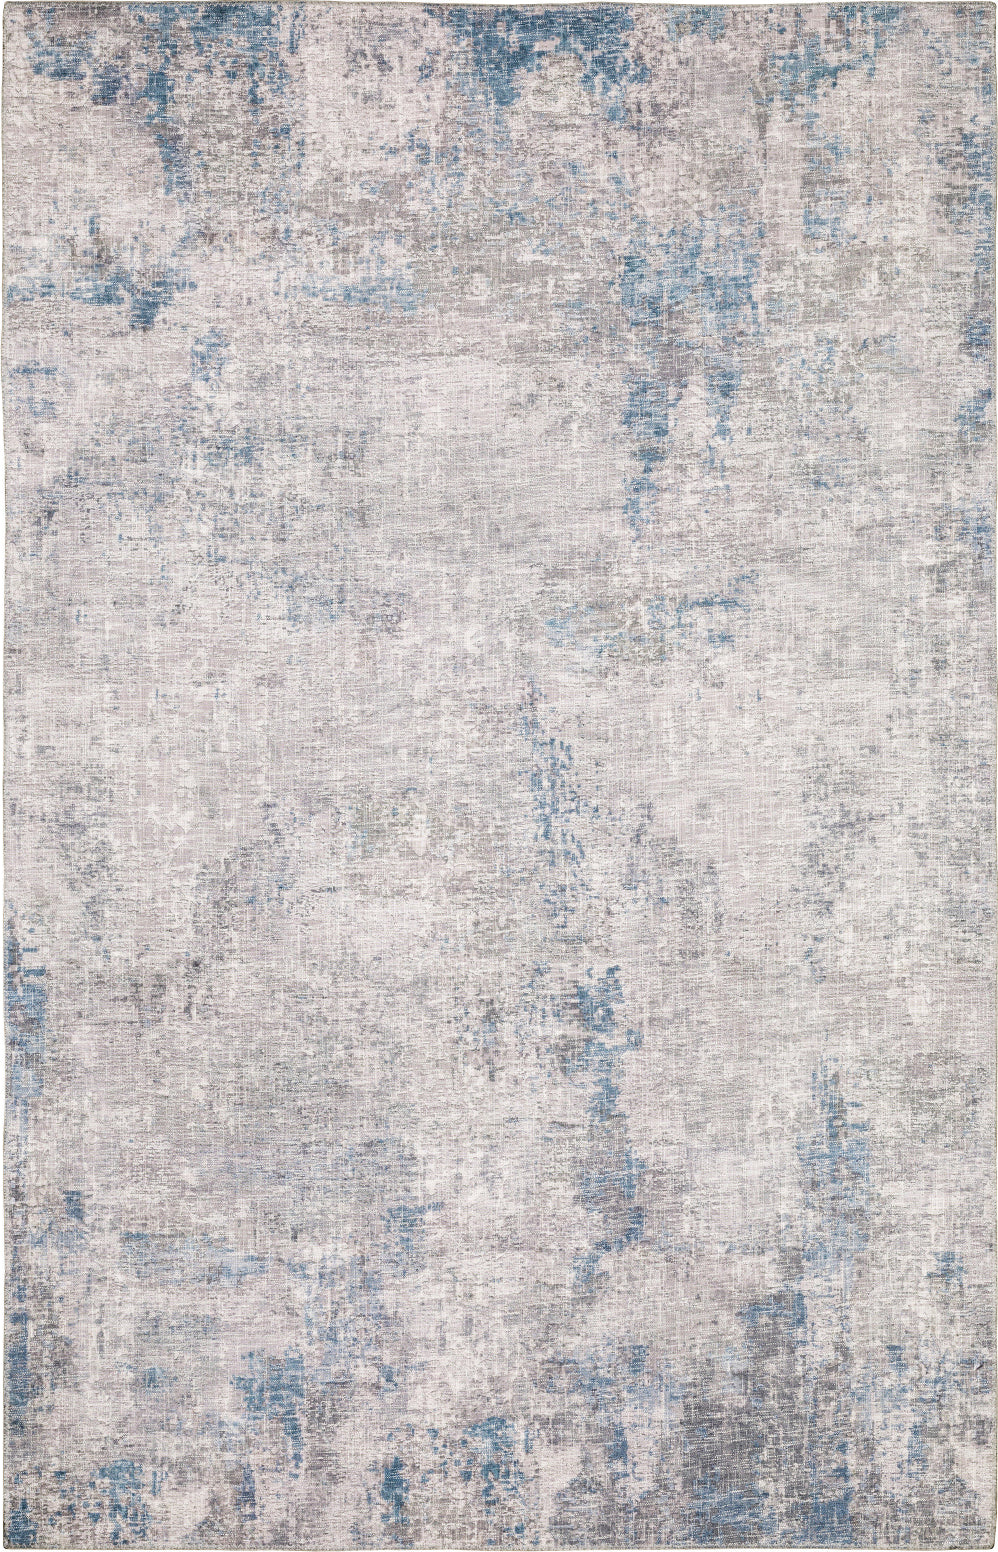 Oriental Weavers Myers Park MYP12 Grey/ Blue Area Rug Main Image Featured